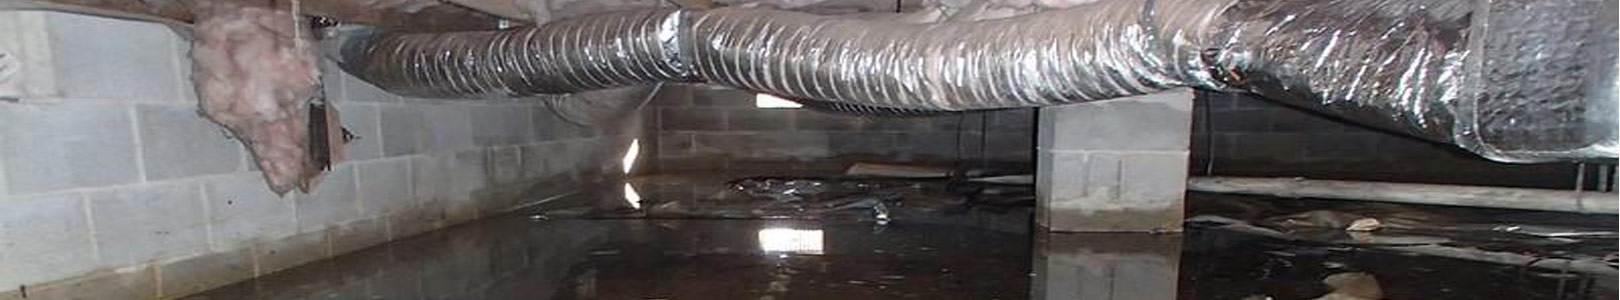 Wet Crawl Space Cleanup in Farmington Hills & Livonia